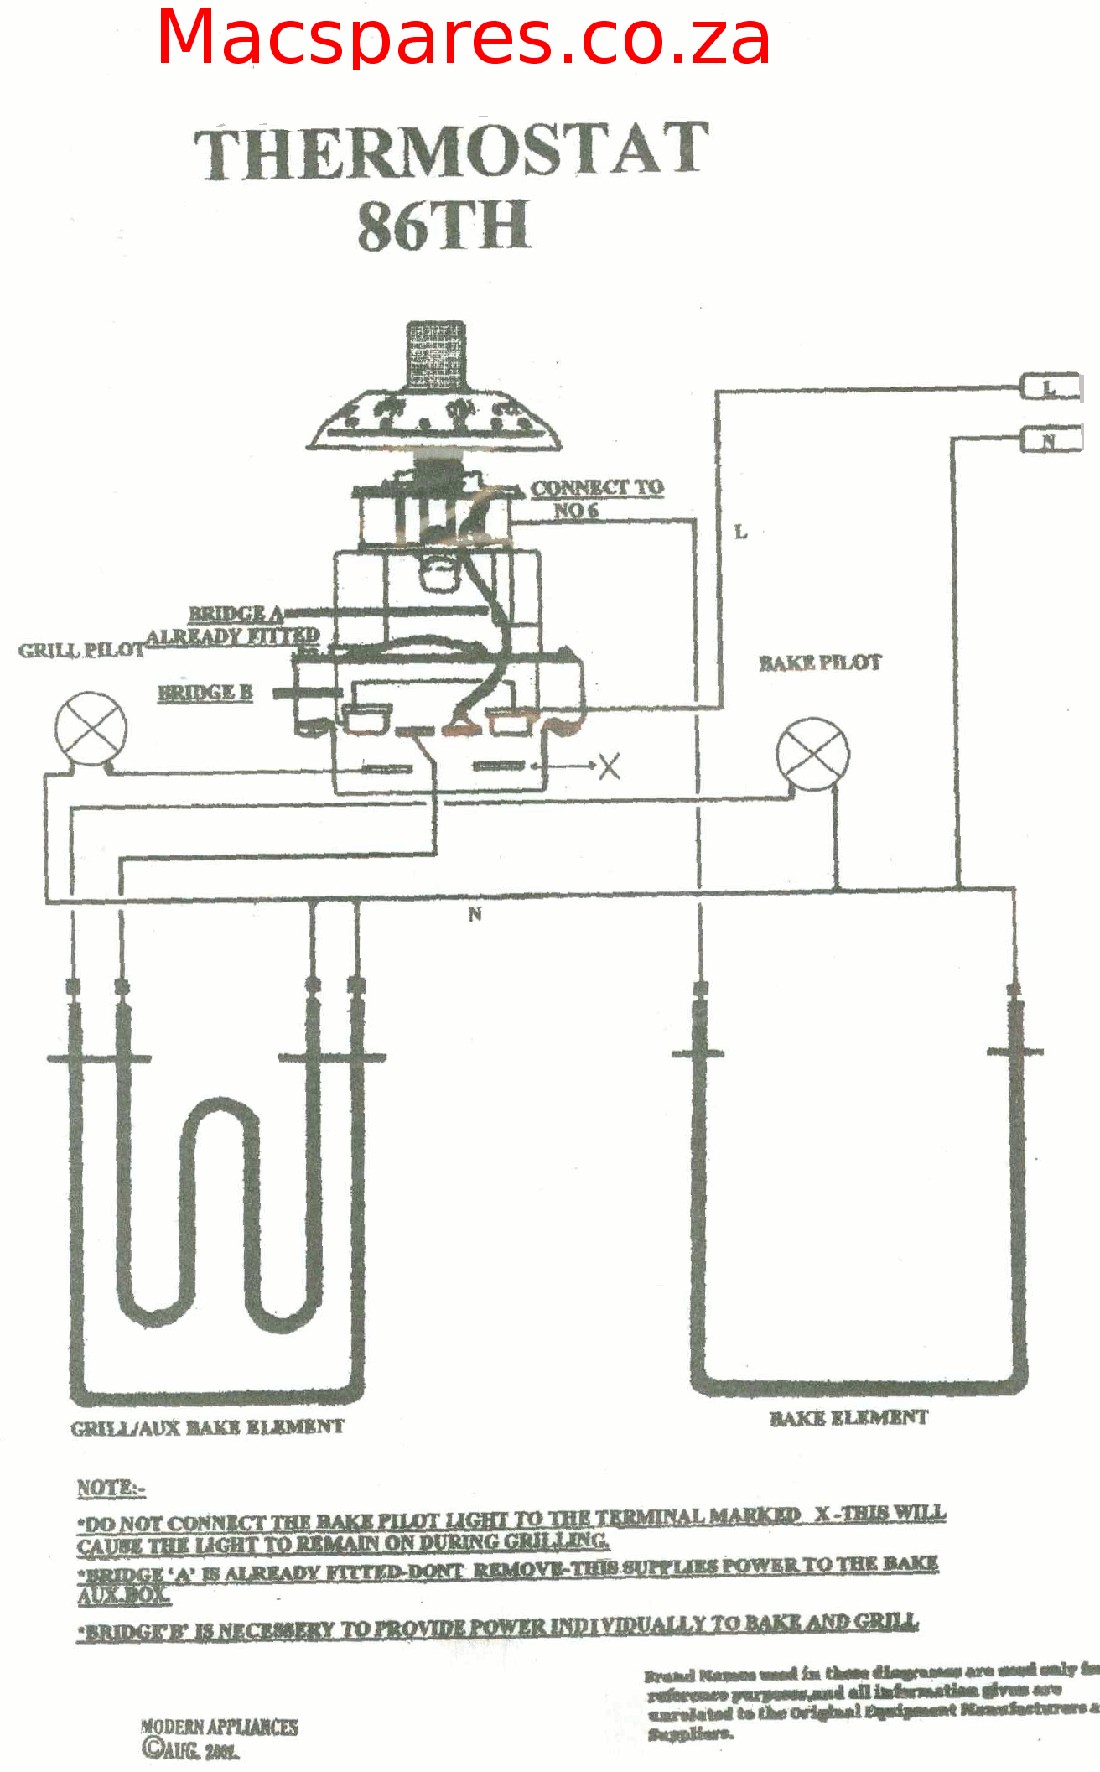 Wiring Diagrams Stoves Switches And Thermostats Macspares Throughout Electric Stove Diagram